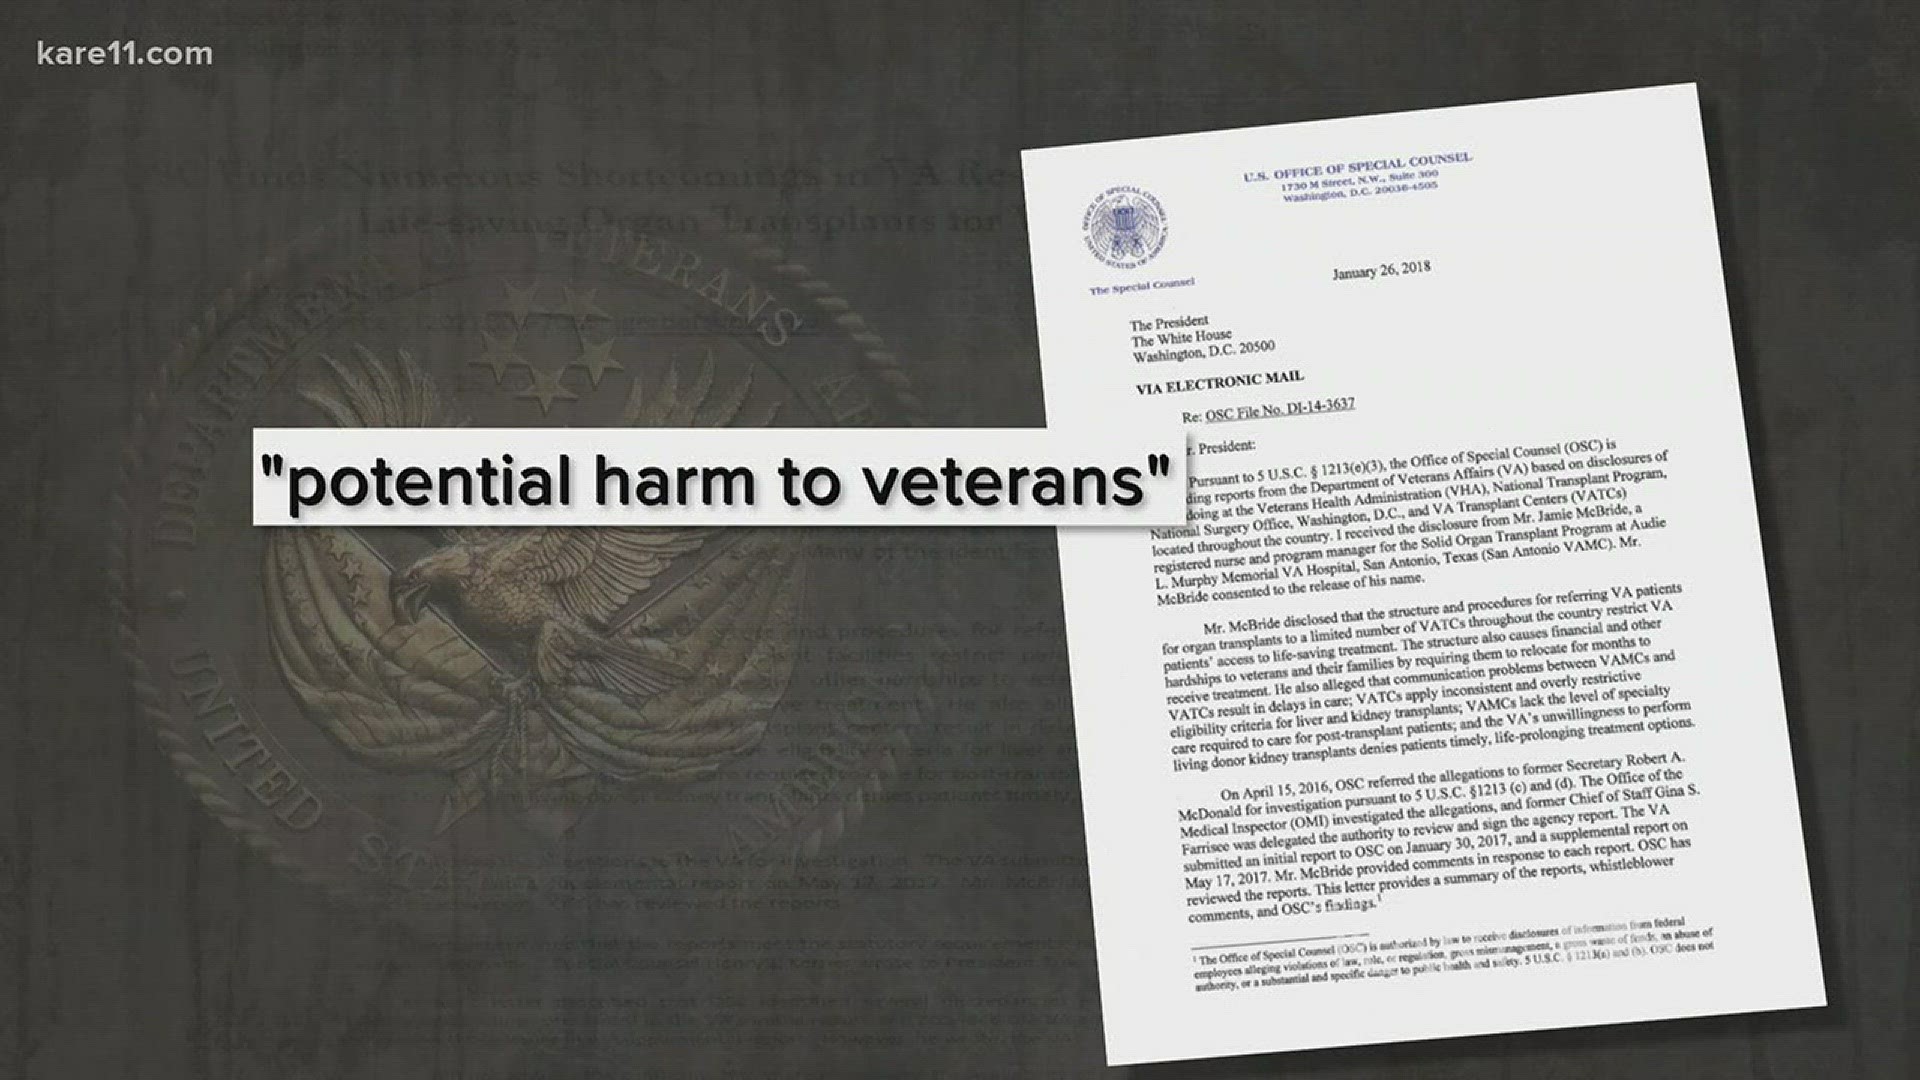 Report to the President warns that whistleblower complaints about life-threatening delays exposed in a KARE 11 investigation have not been addressed. http://kare11.tv/2BonMQu